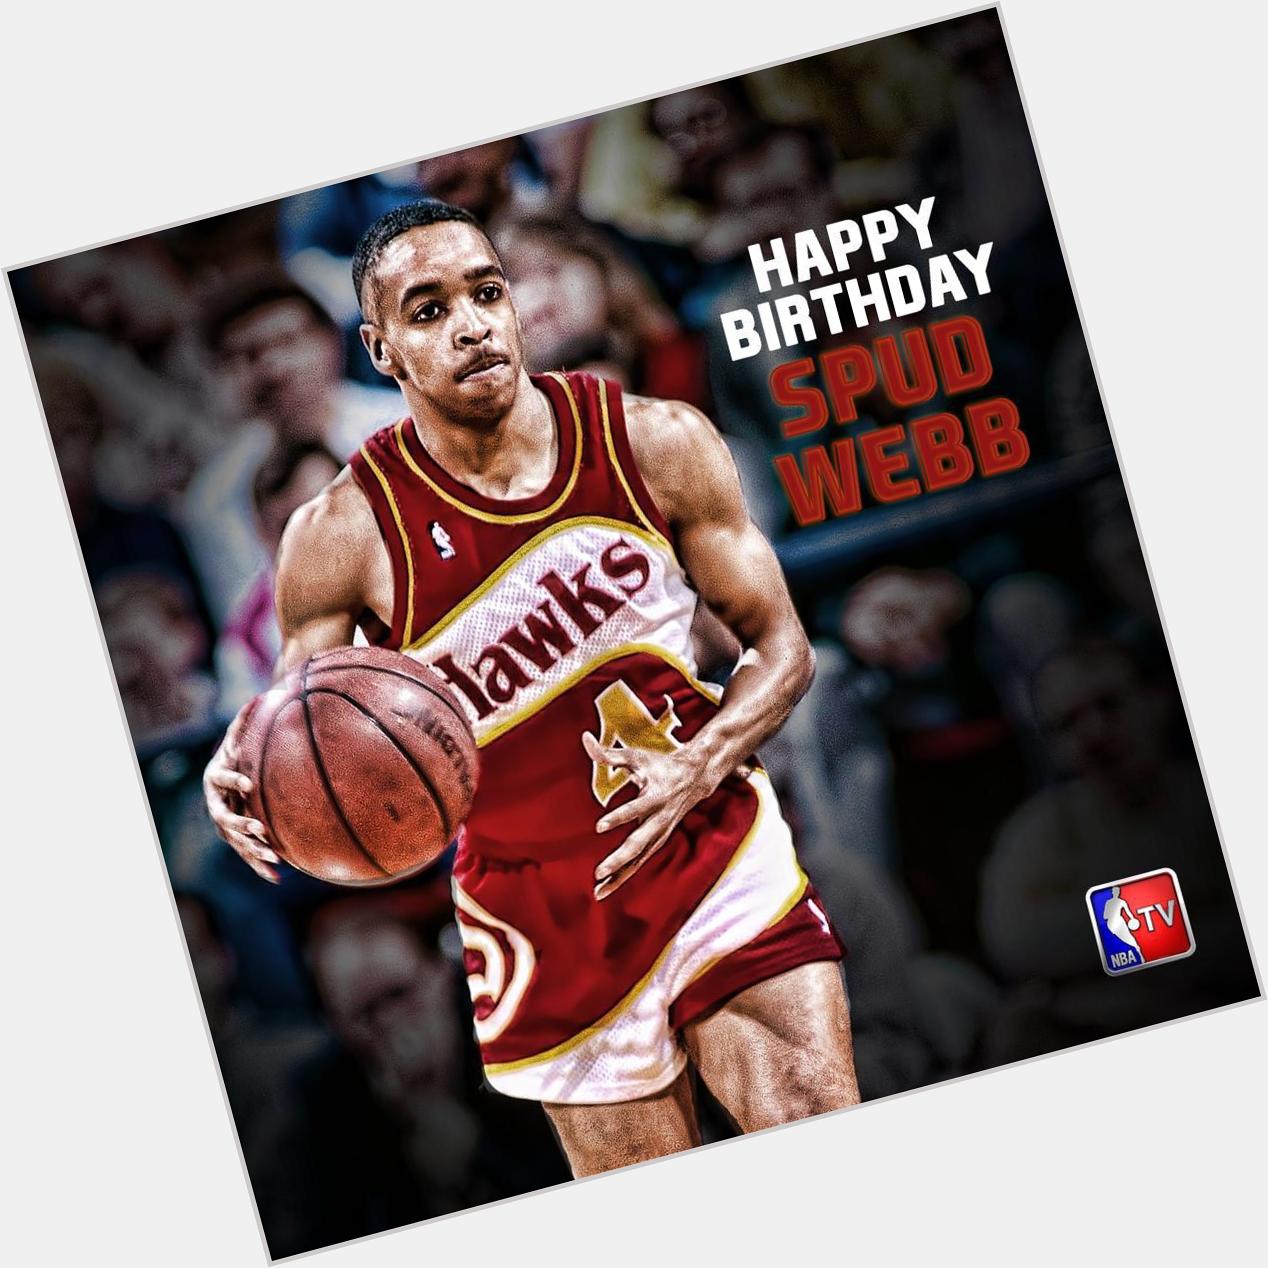 Join us in wishing former point guard Spud Webb a Happy Birthday! Photo via 